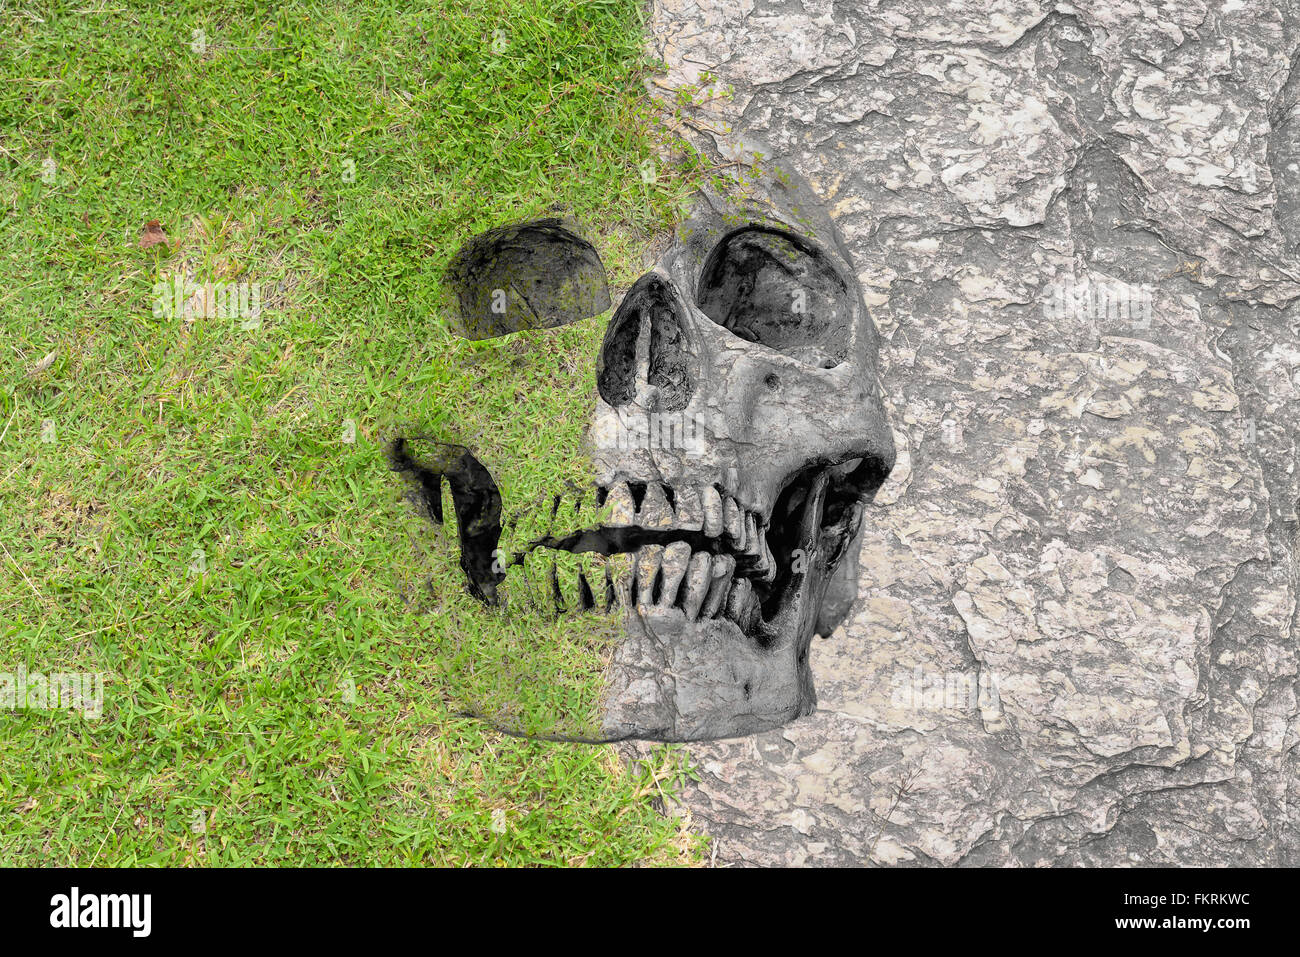 abstract symbol idea, Disparity Soft Hard and life, skull in short grass lawn and seamless rock texture. Disparity of life No.1 Stock Photo